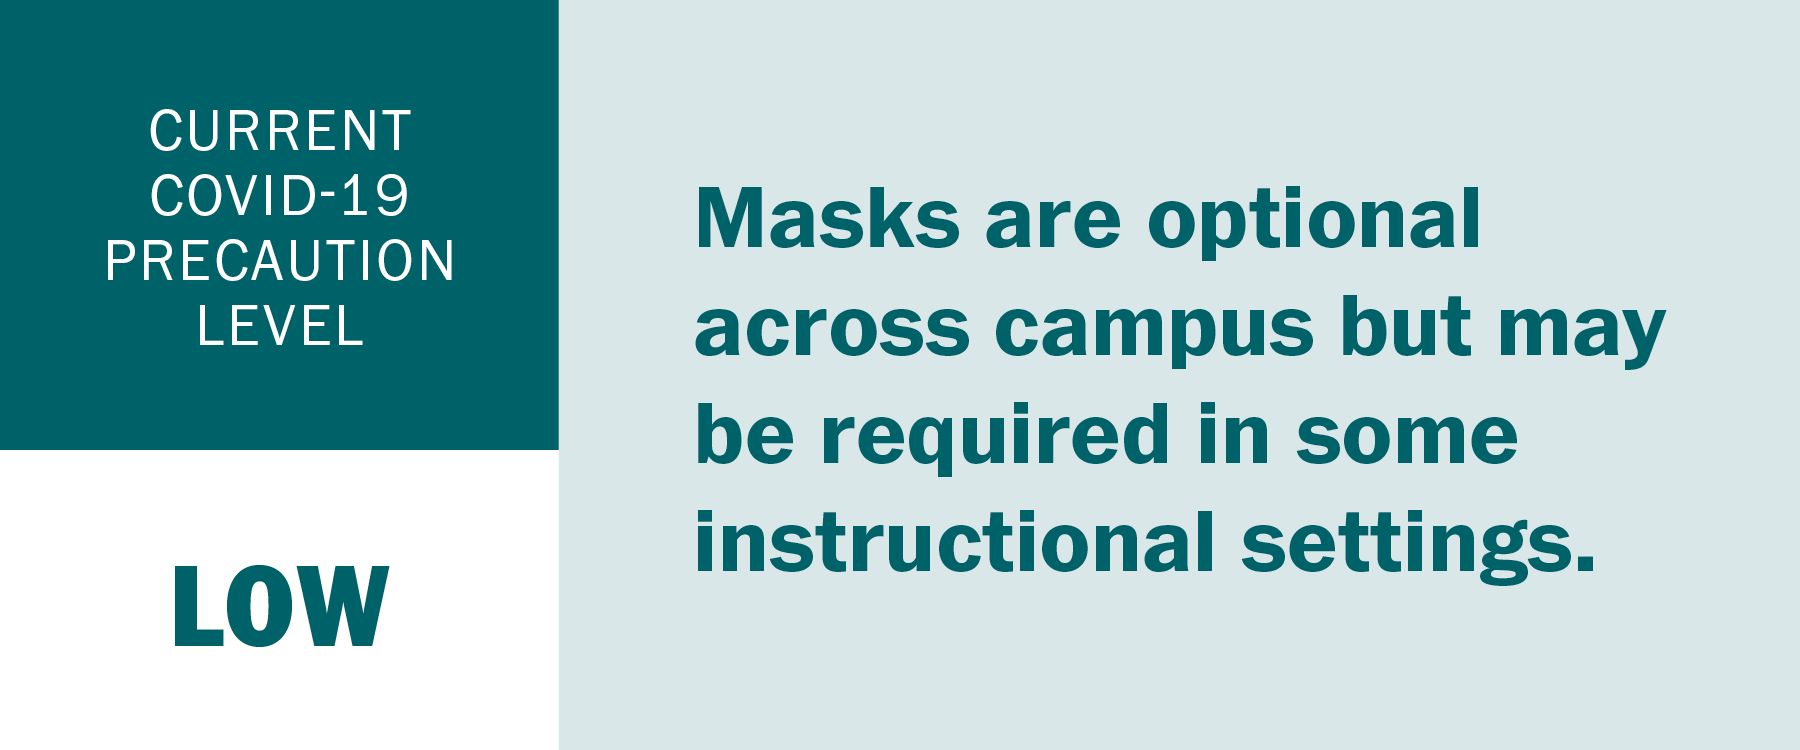 current covid precaution level is low and masks are optional across campus.